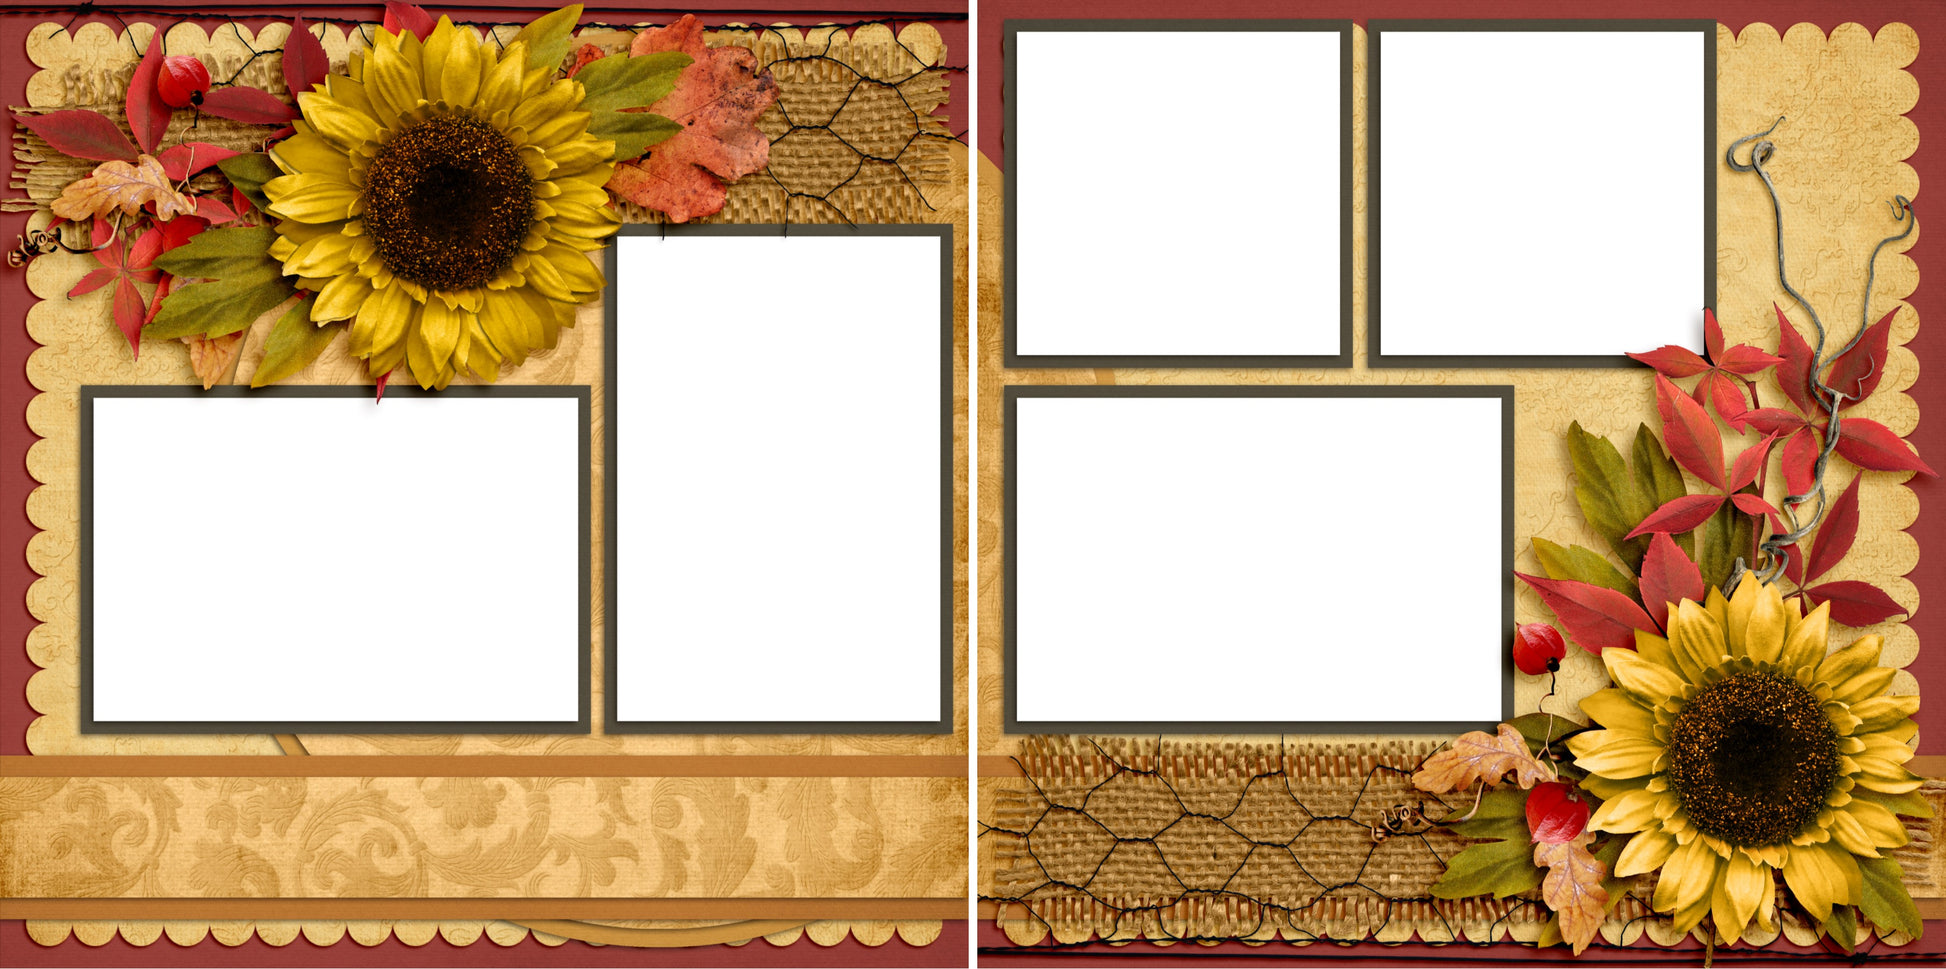 Autumn Whispers - Digital Scrapbook Pages - INSTANT DOWNLOAD - EZscrapbooks Scrapbook Layouts Fall - Autumn, Thanksgiving